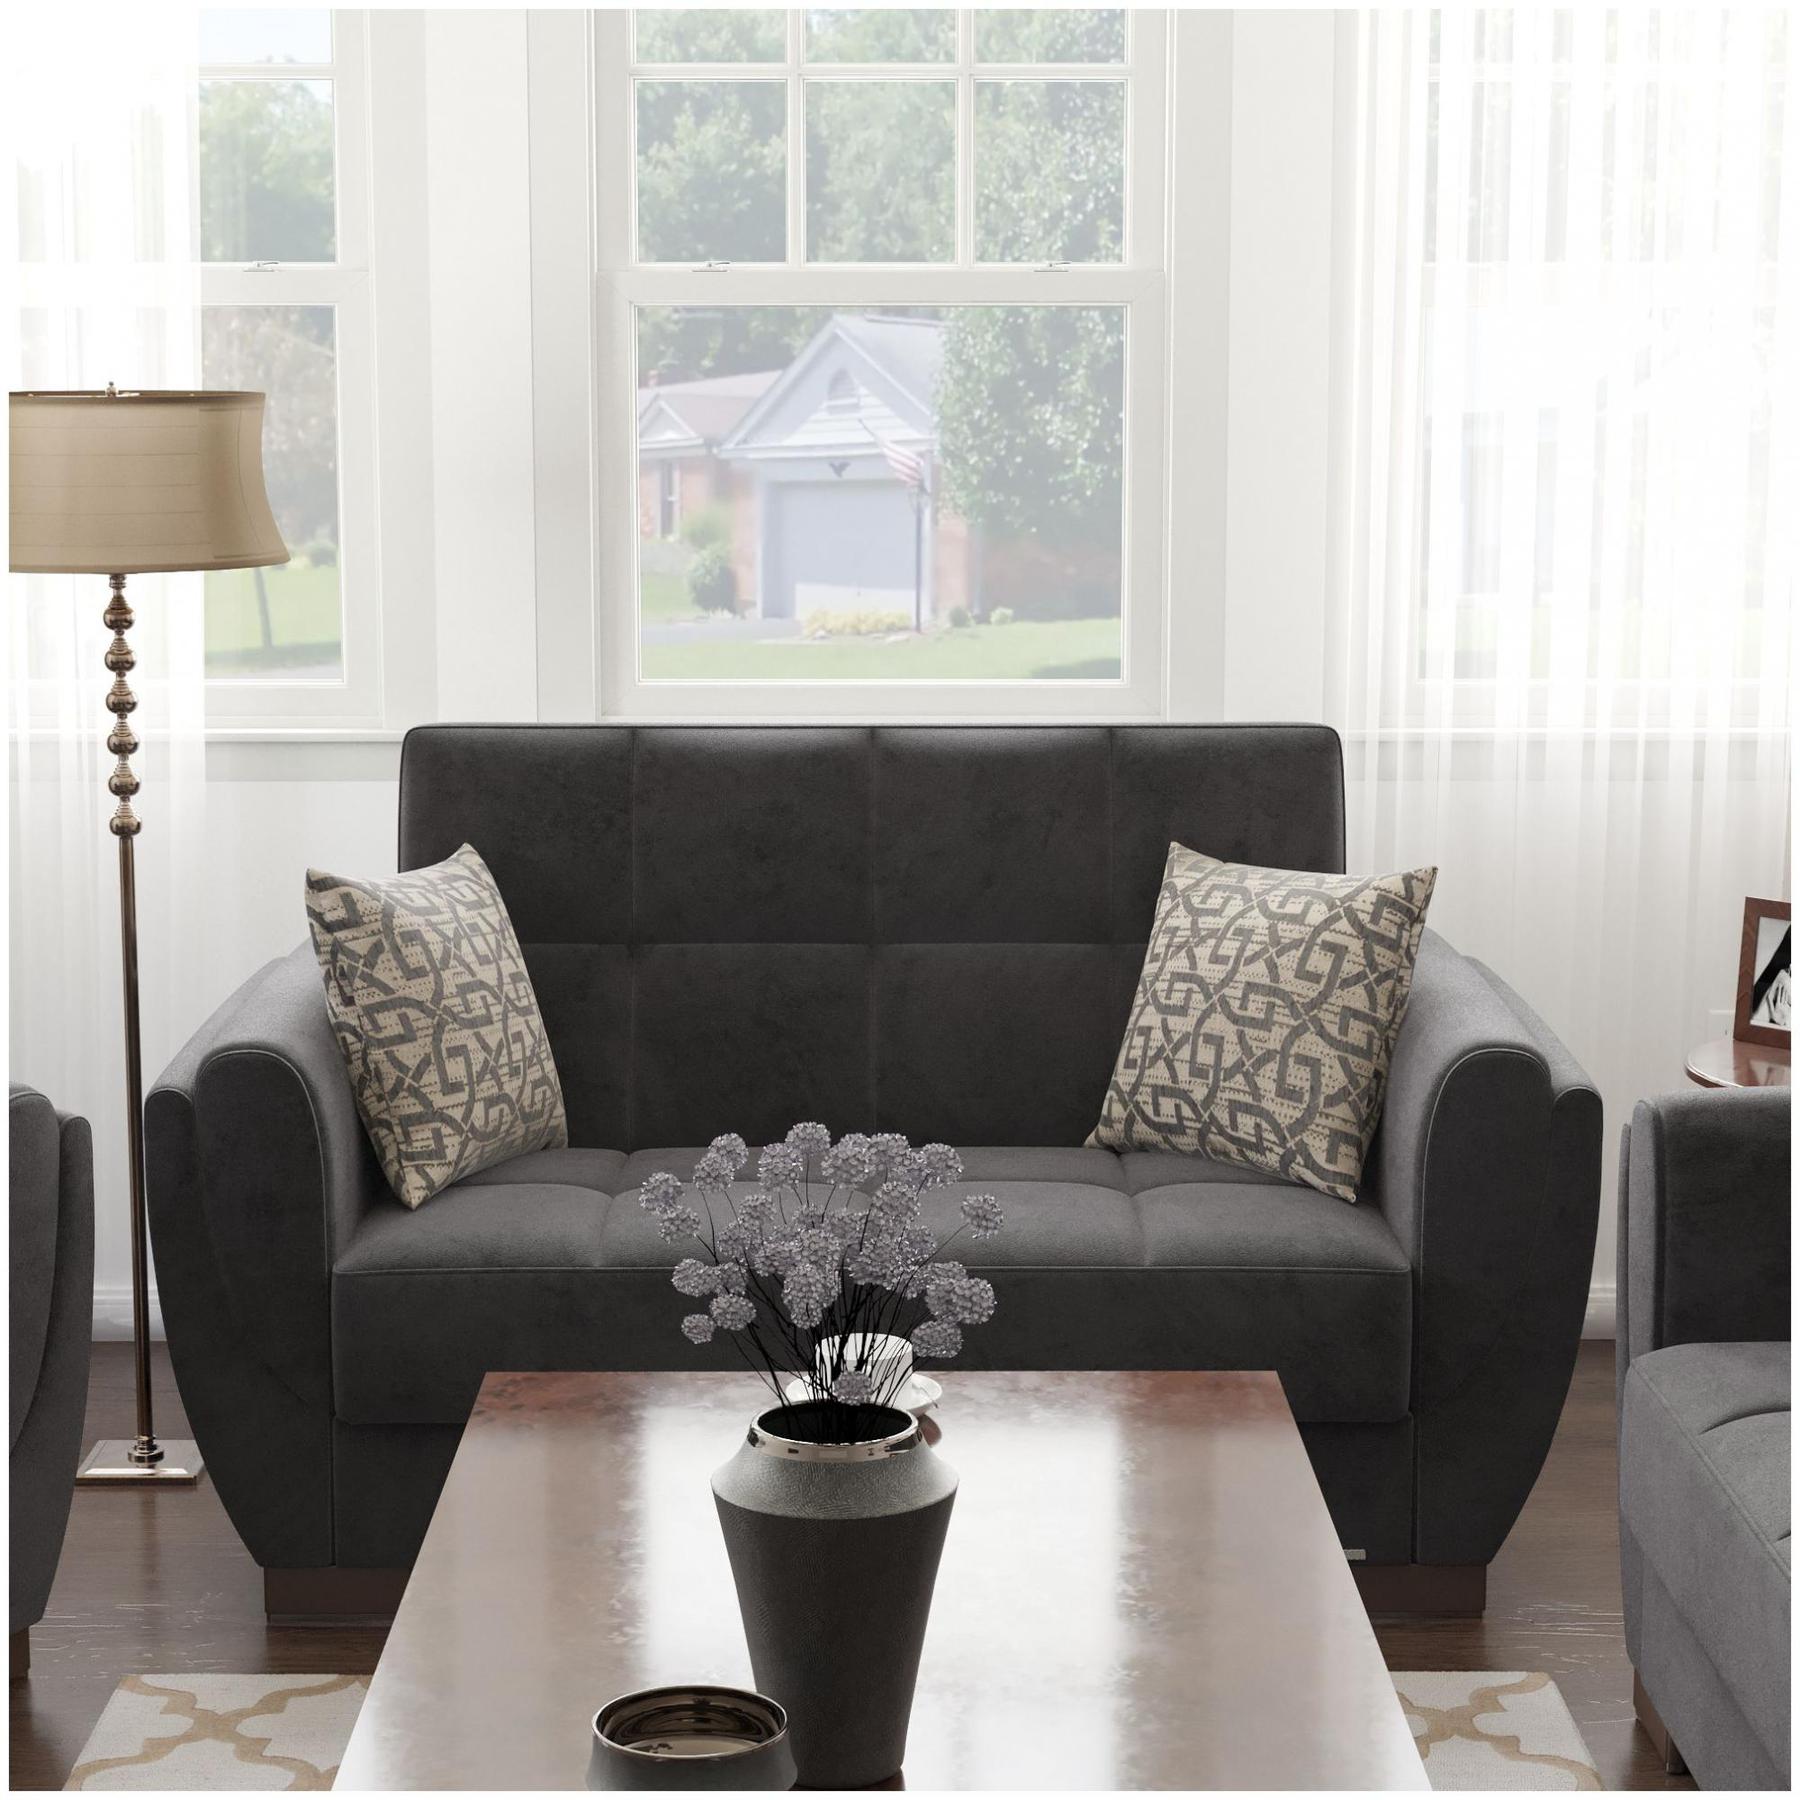 Modern design, Black , Microfiber upholstered convertible sleeper Loveseat with underseat storage from Voyage Shelter by Ottomanson in living room lifestyle setting by itself. This Loveseat measures 71 inches width by 36 inches depth by 41 inches height.